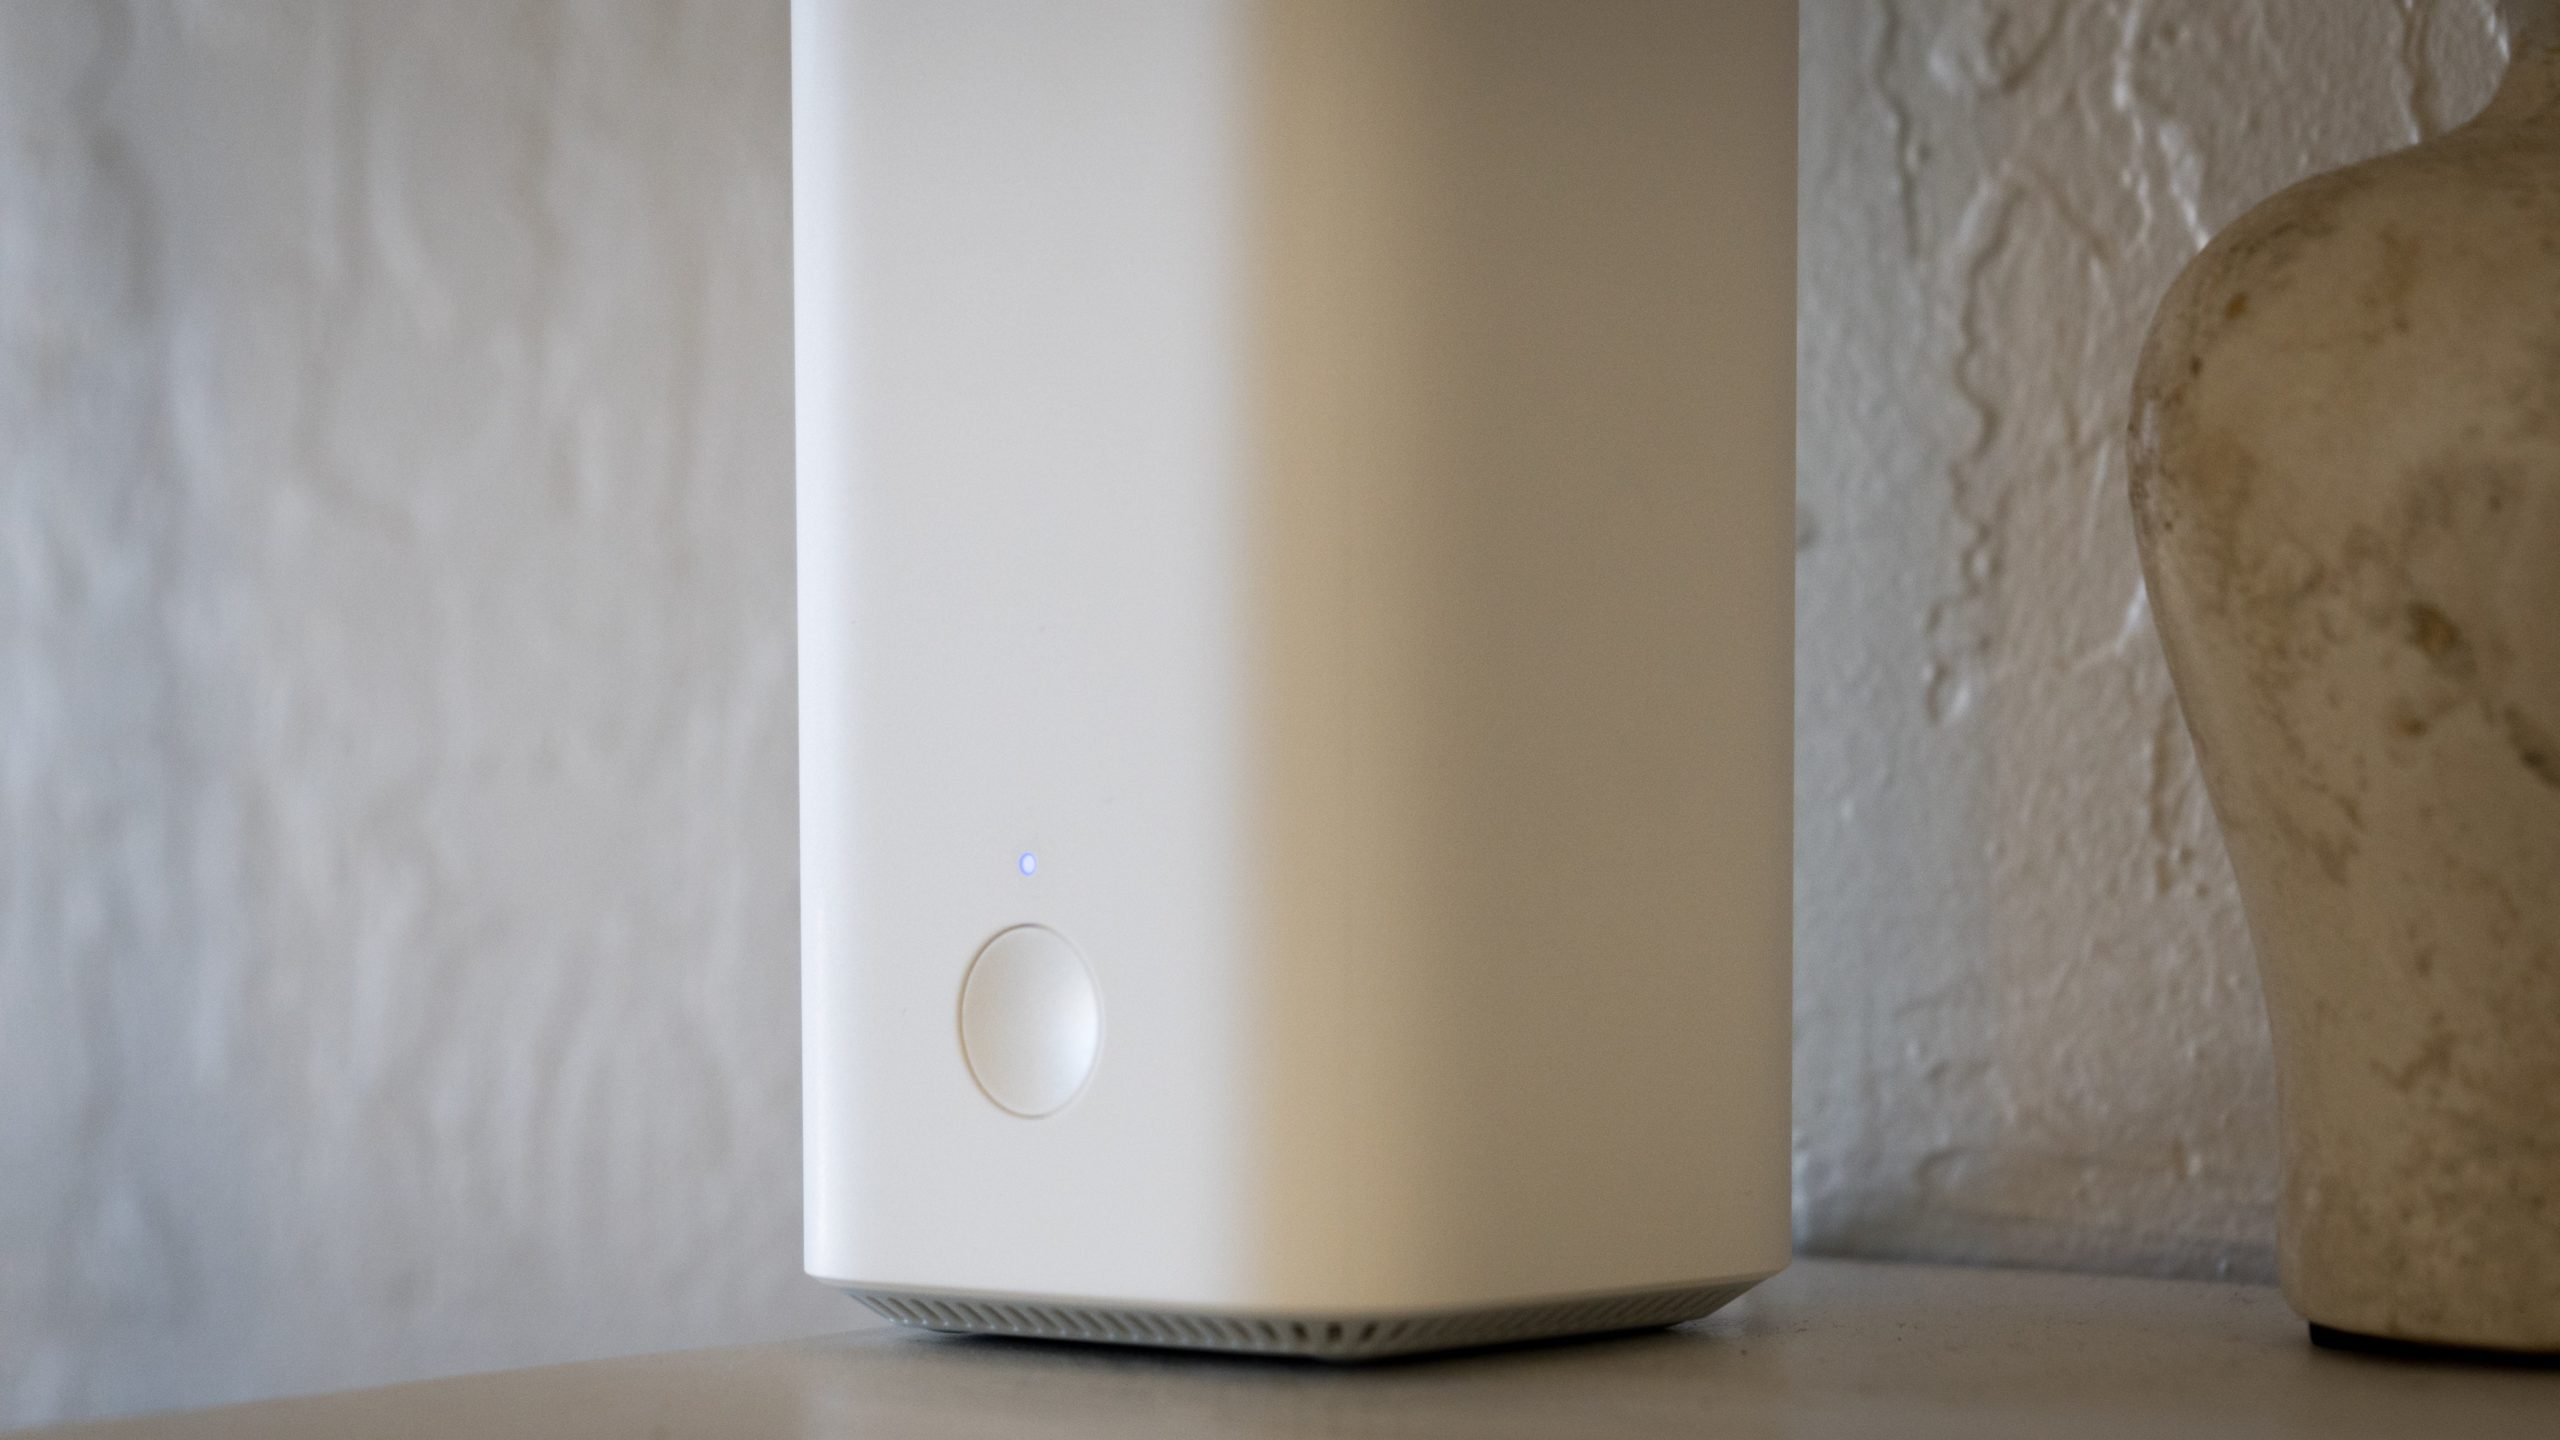 The Vilo Mesh Wi-Fi System has a dimmable indicator light above the button on each node. (Photo: Florence Ion/Gizmodo)